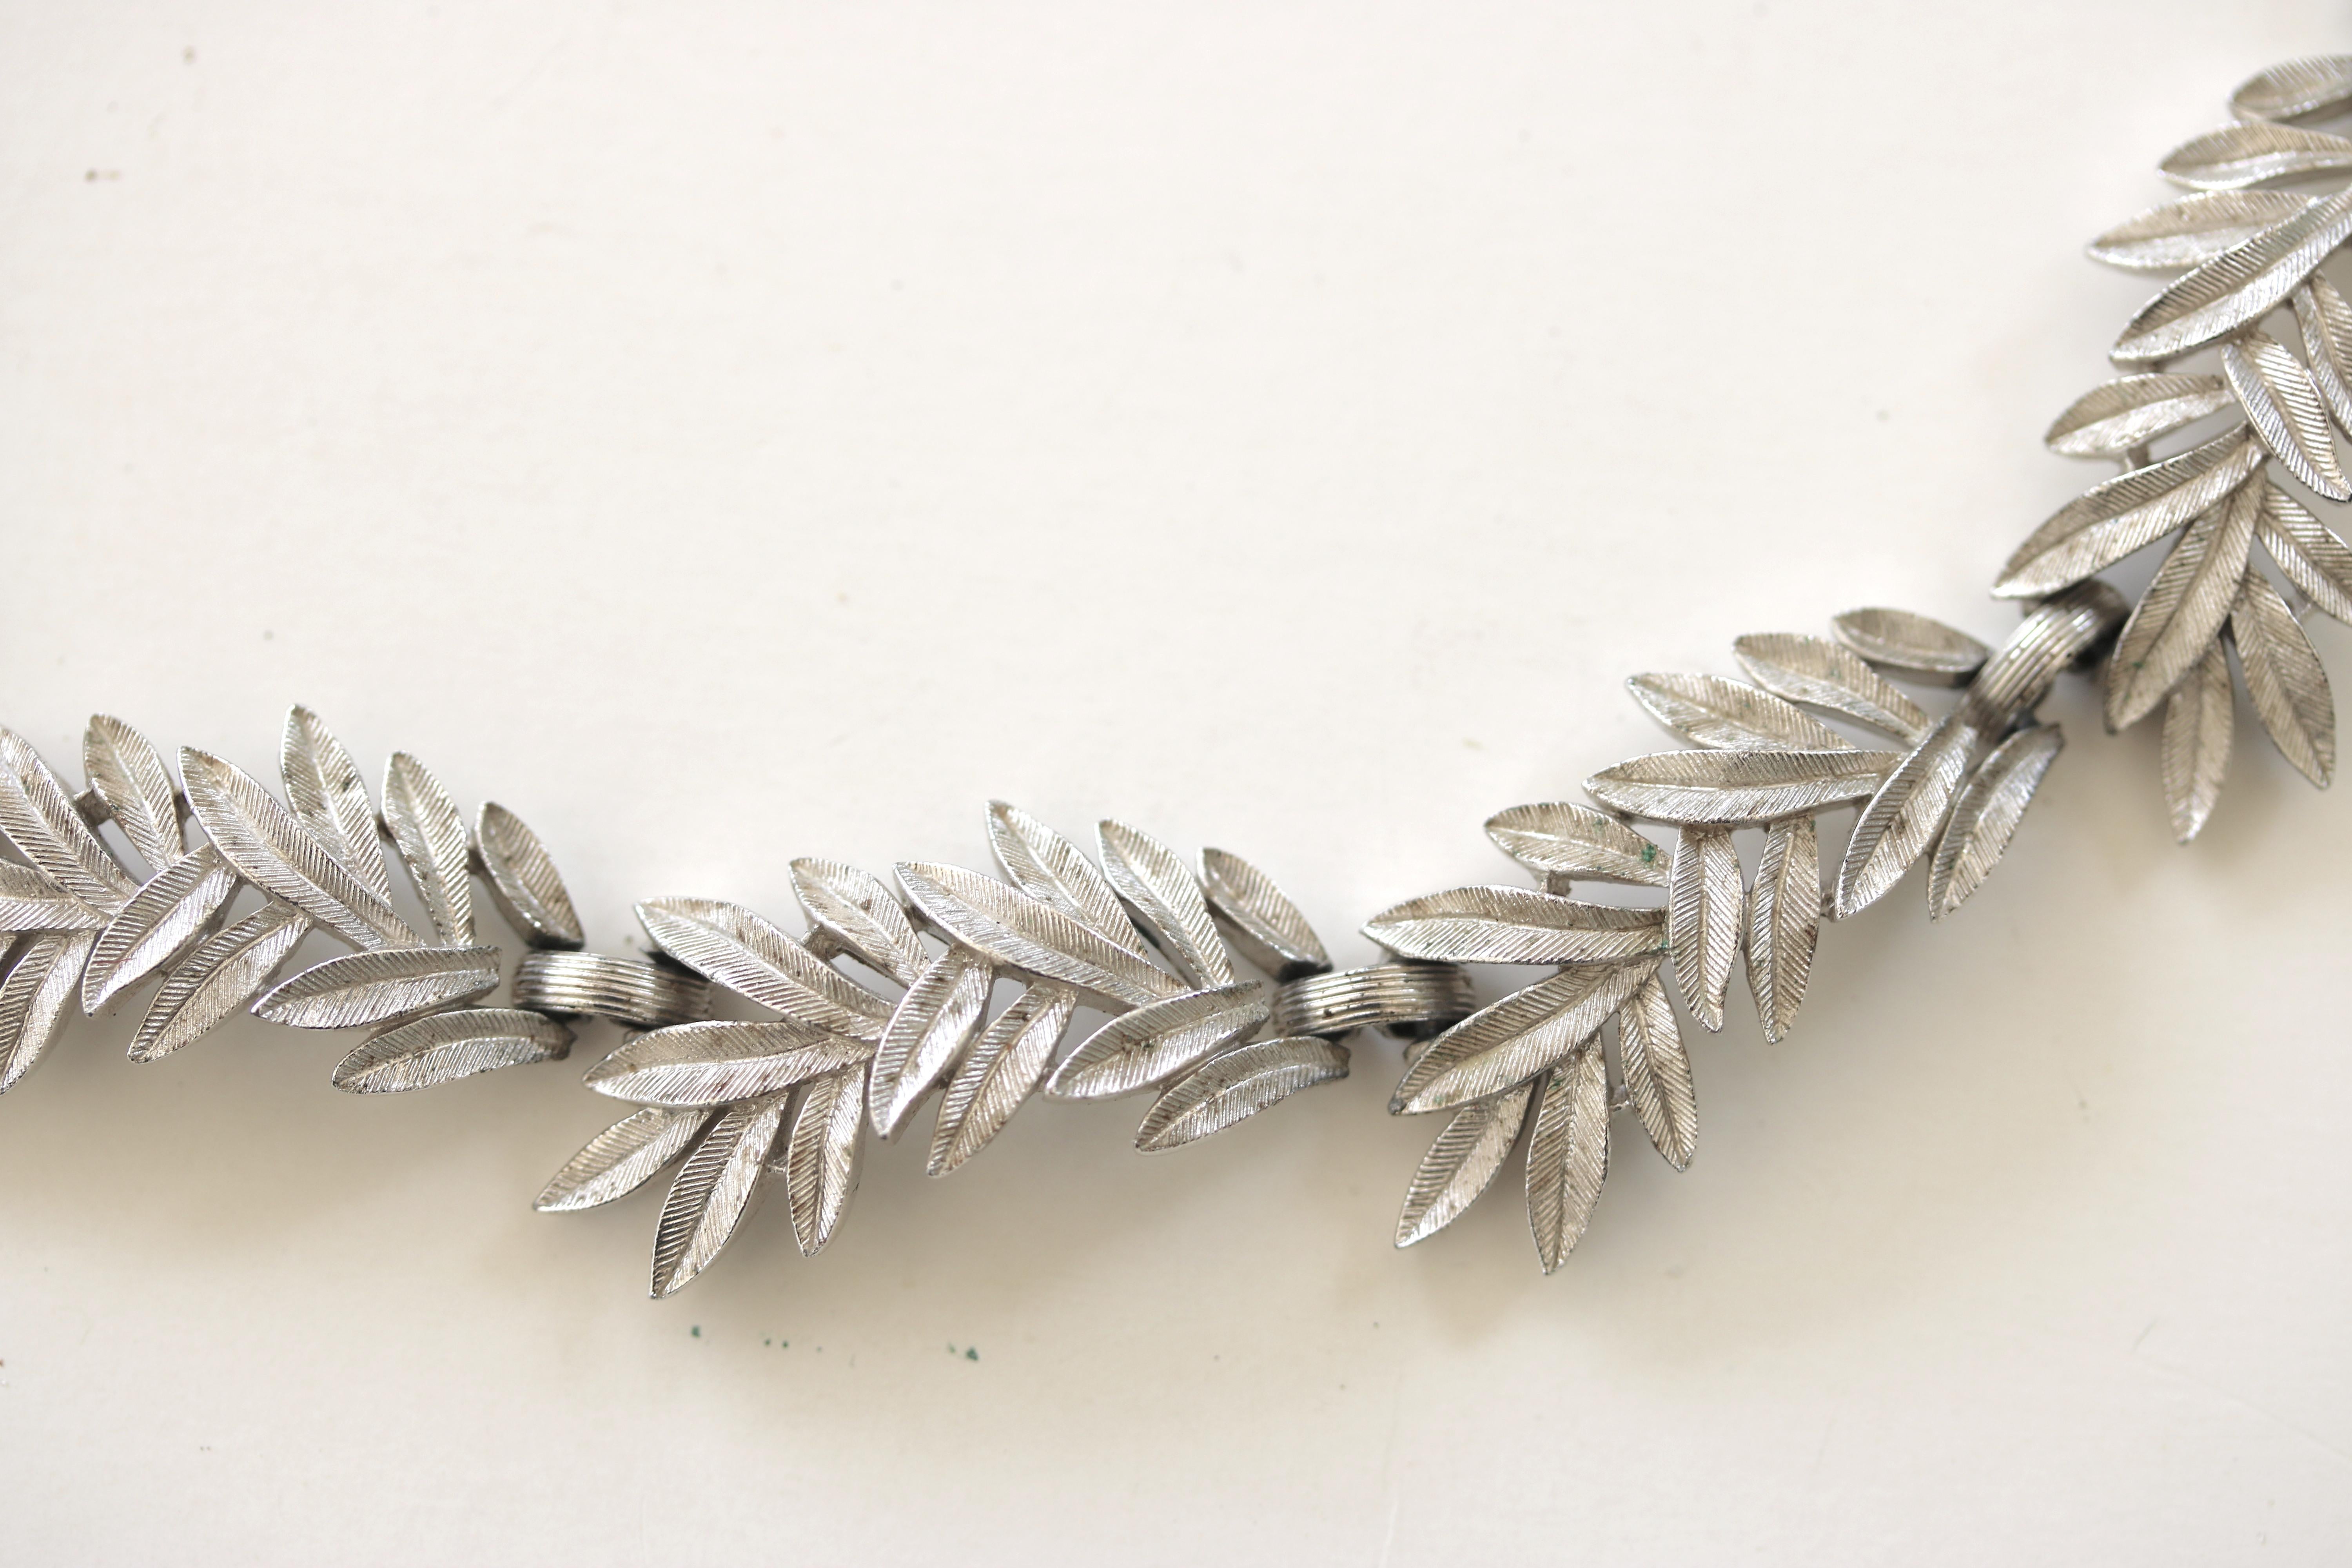 A Vintage articulated brushed silver tone leaf necklace and matching earrings by famed Trifari.  circa 1950s.
The delicate appearance of each asymmetrical leaf with a ribbed pattern design has 10 linked panels on the necklace a chain for